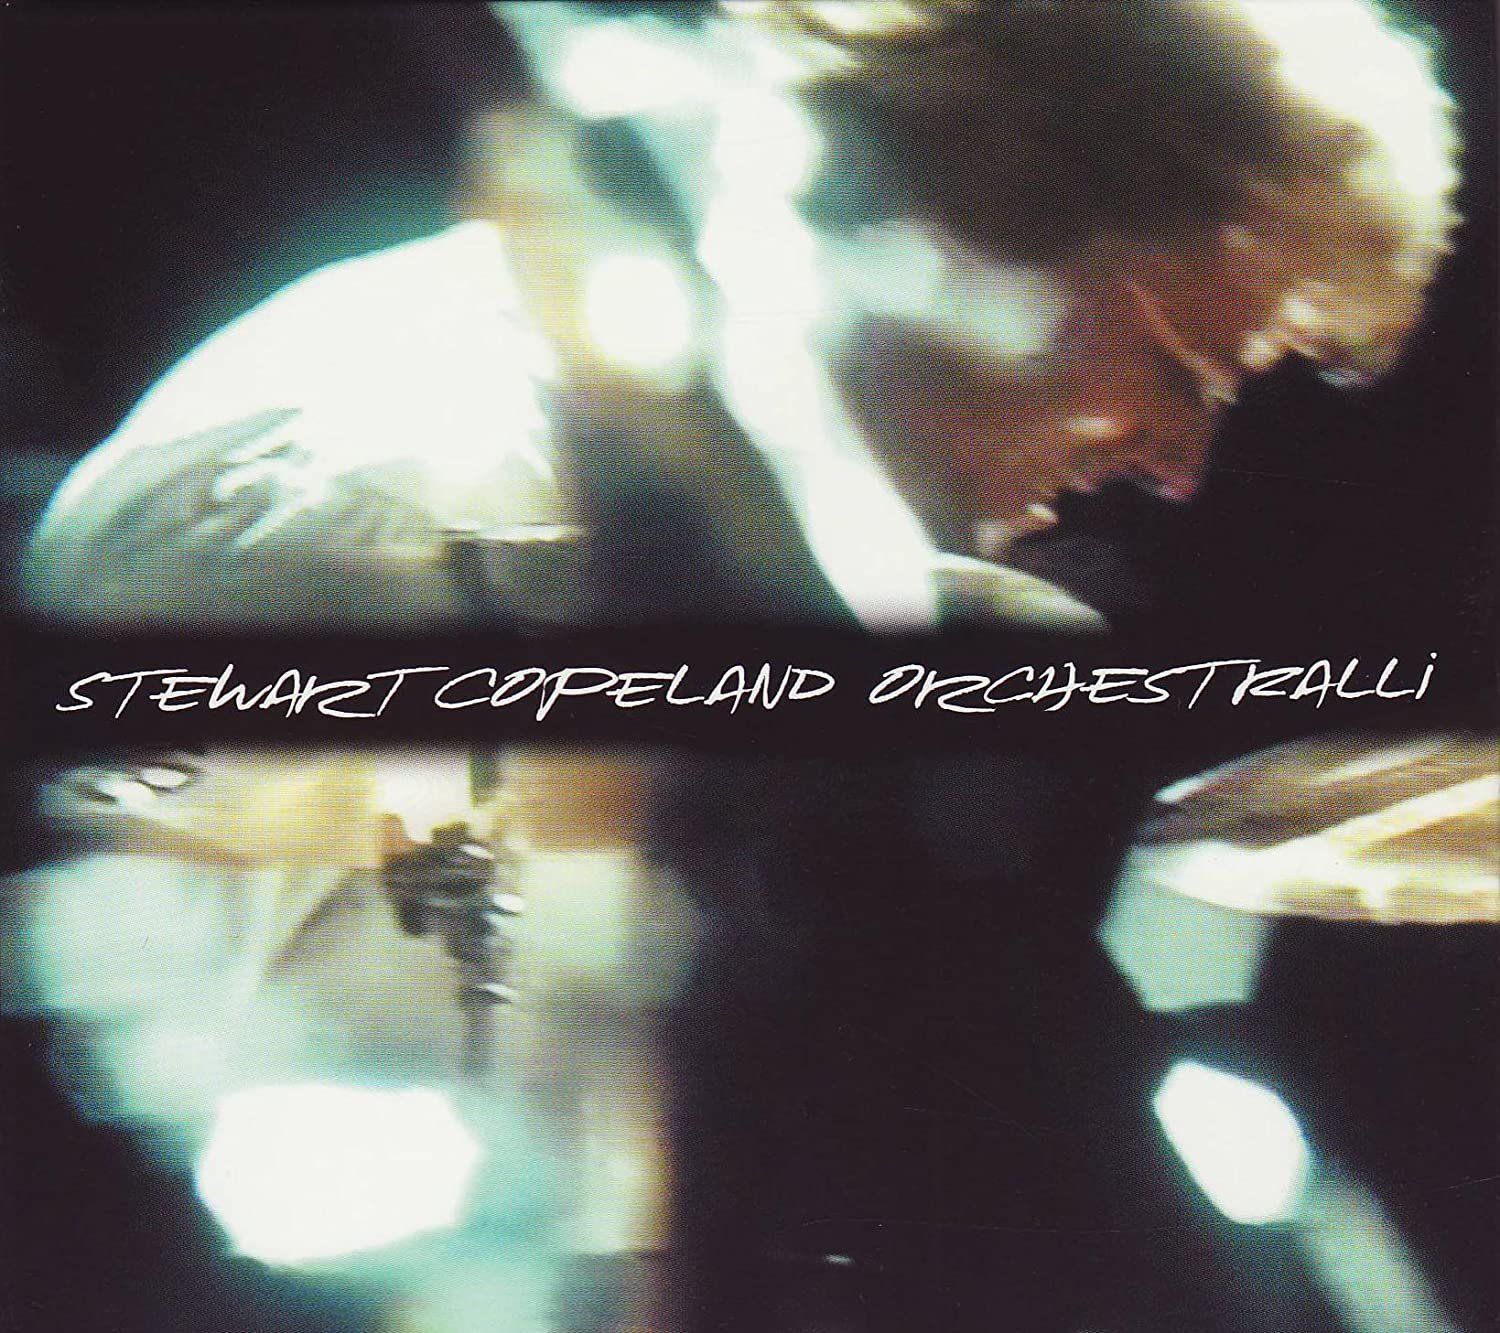  A live recording of compositions of Stewart Copeland (on drums, of course) with orchestra.  